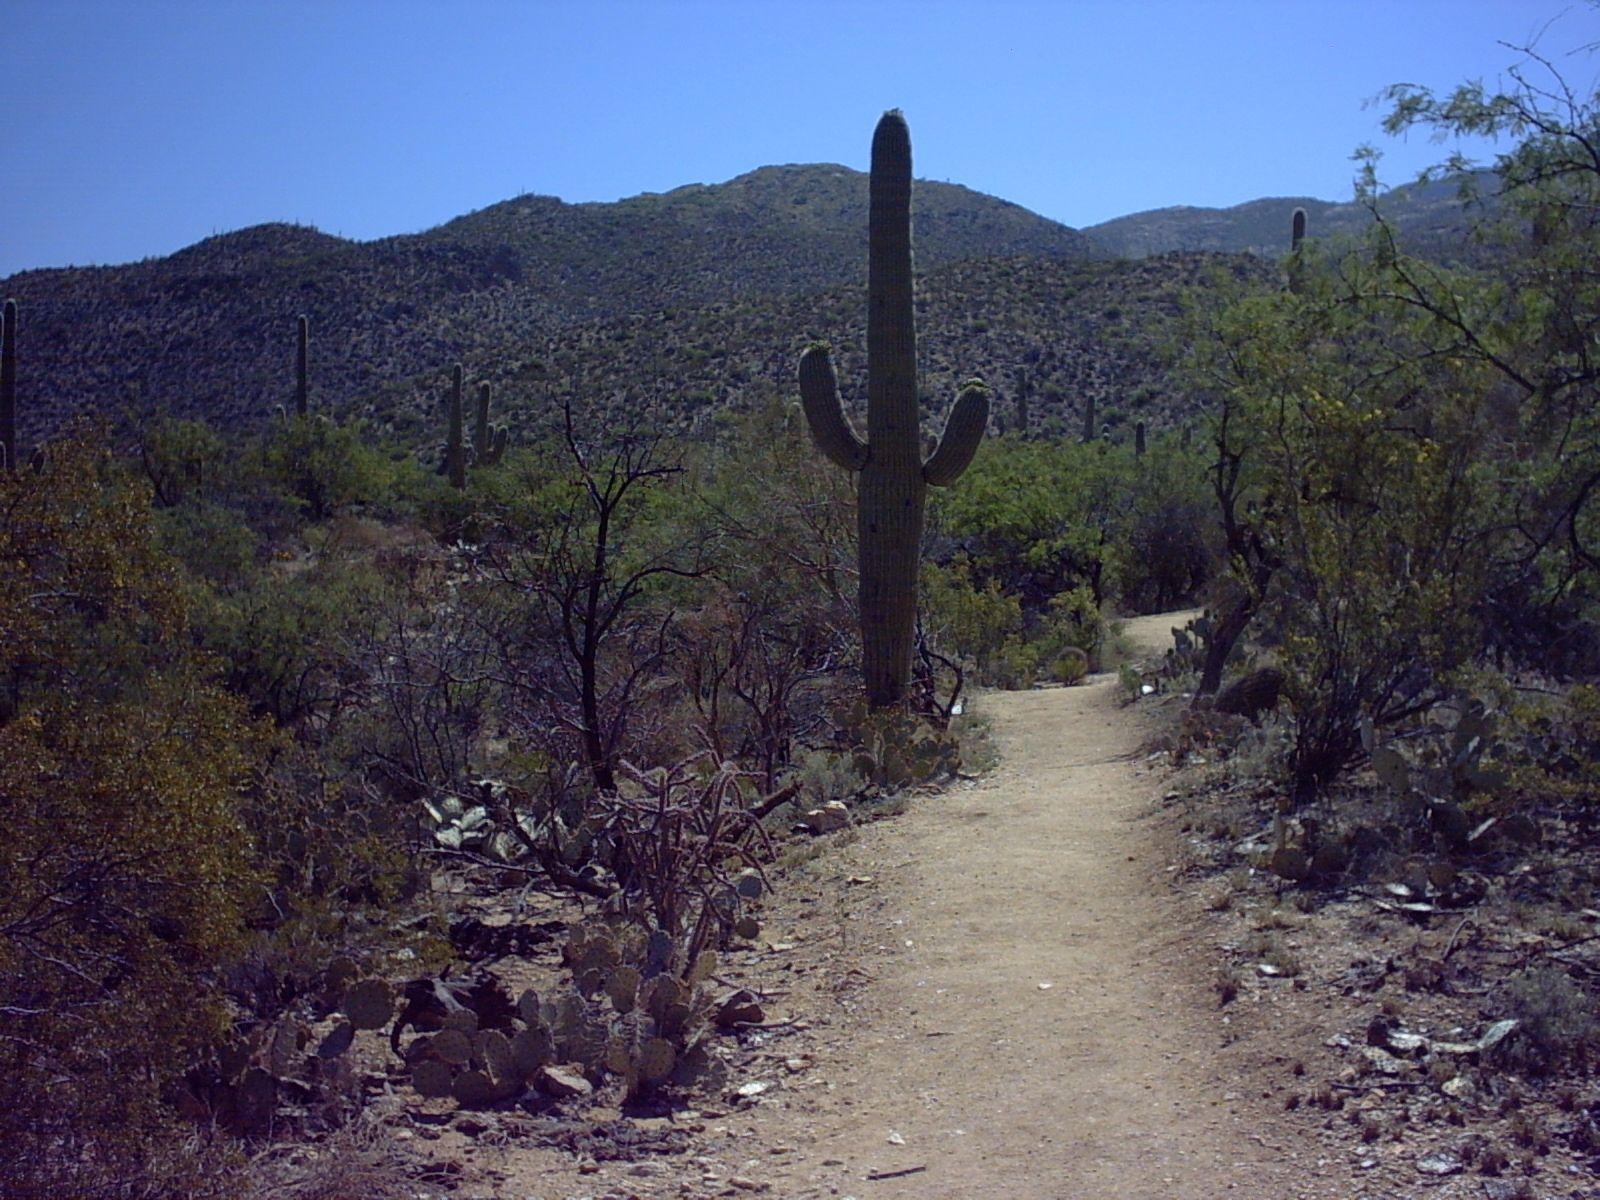 Hikes & Trails at the Park of Saguaro National Park